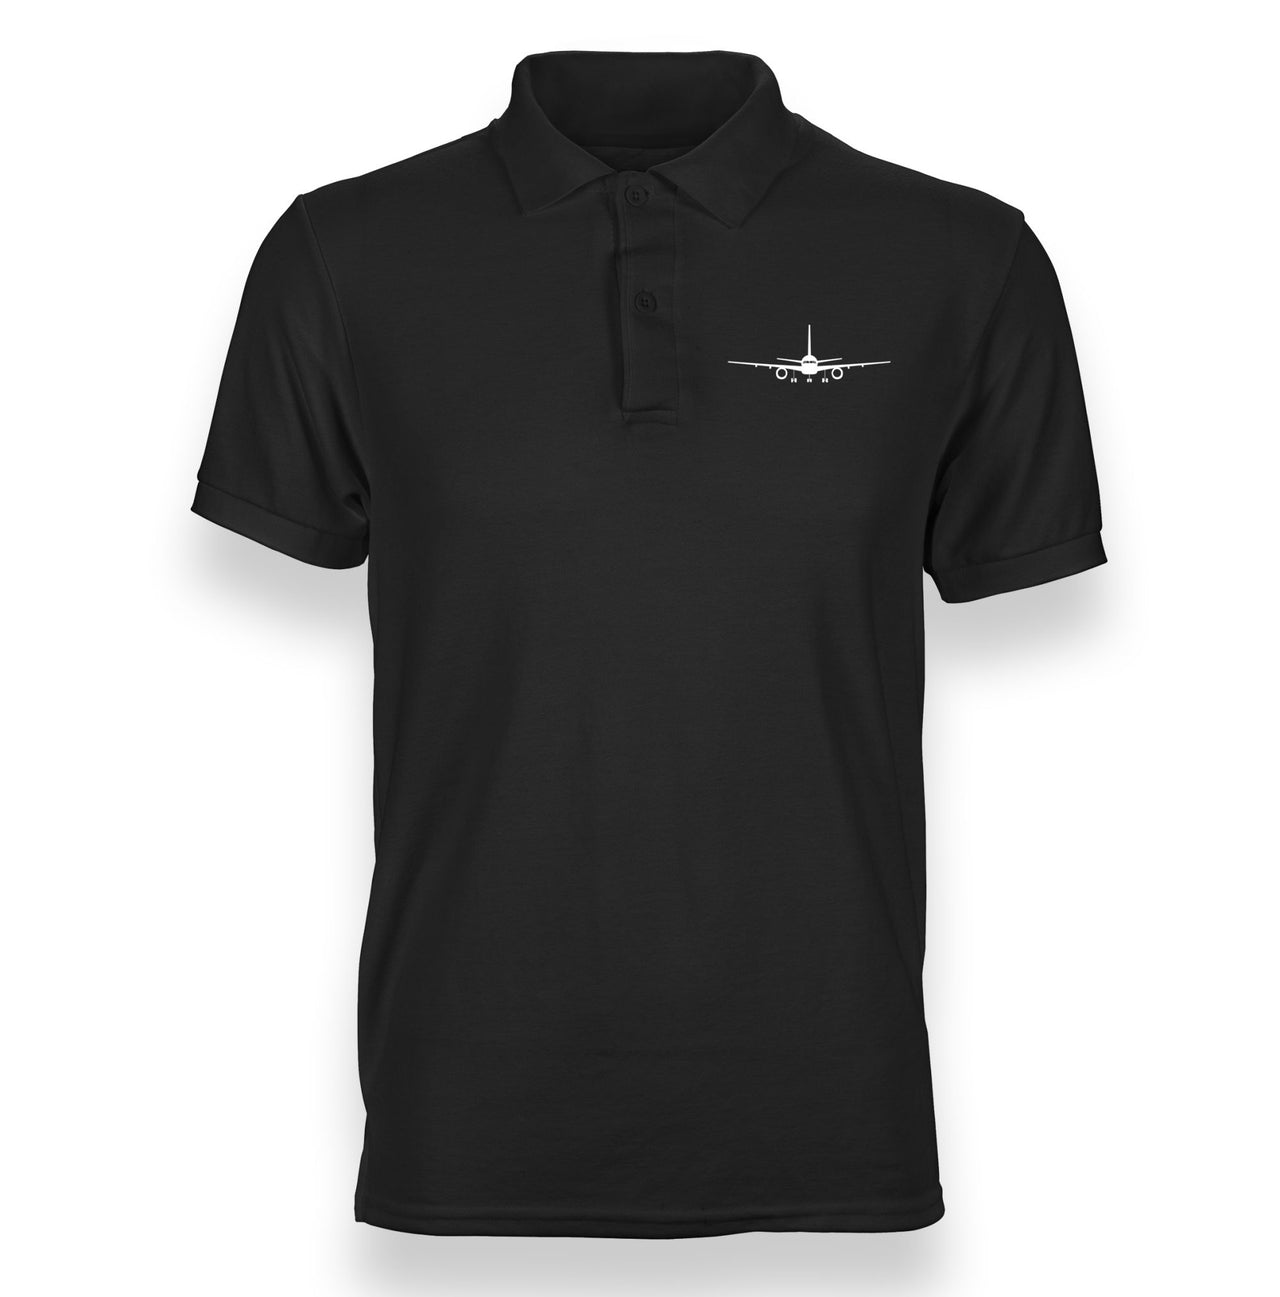 Boeing 757 Silhouette Designed "WOMEN" Polo T-Shirts